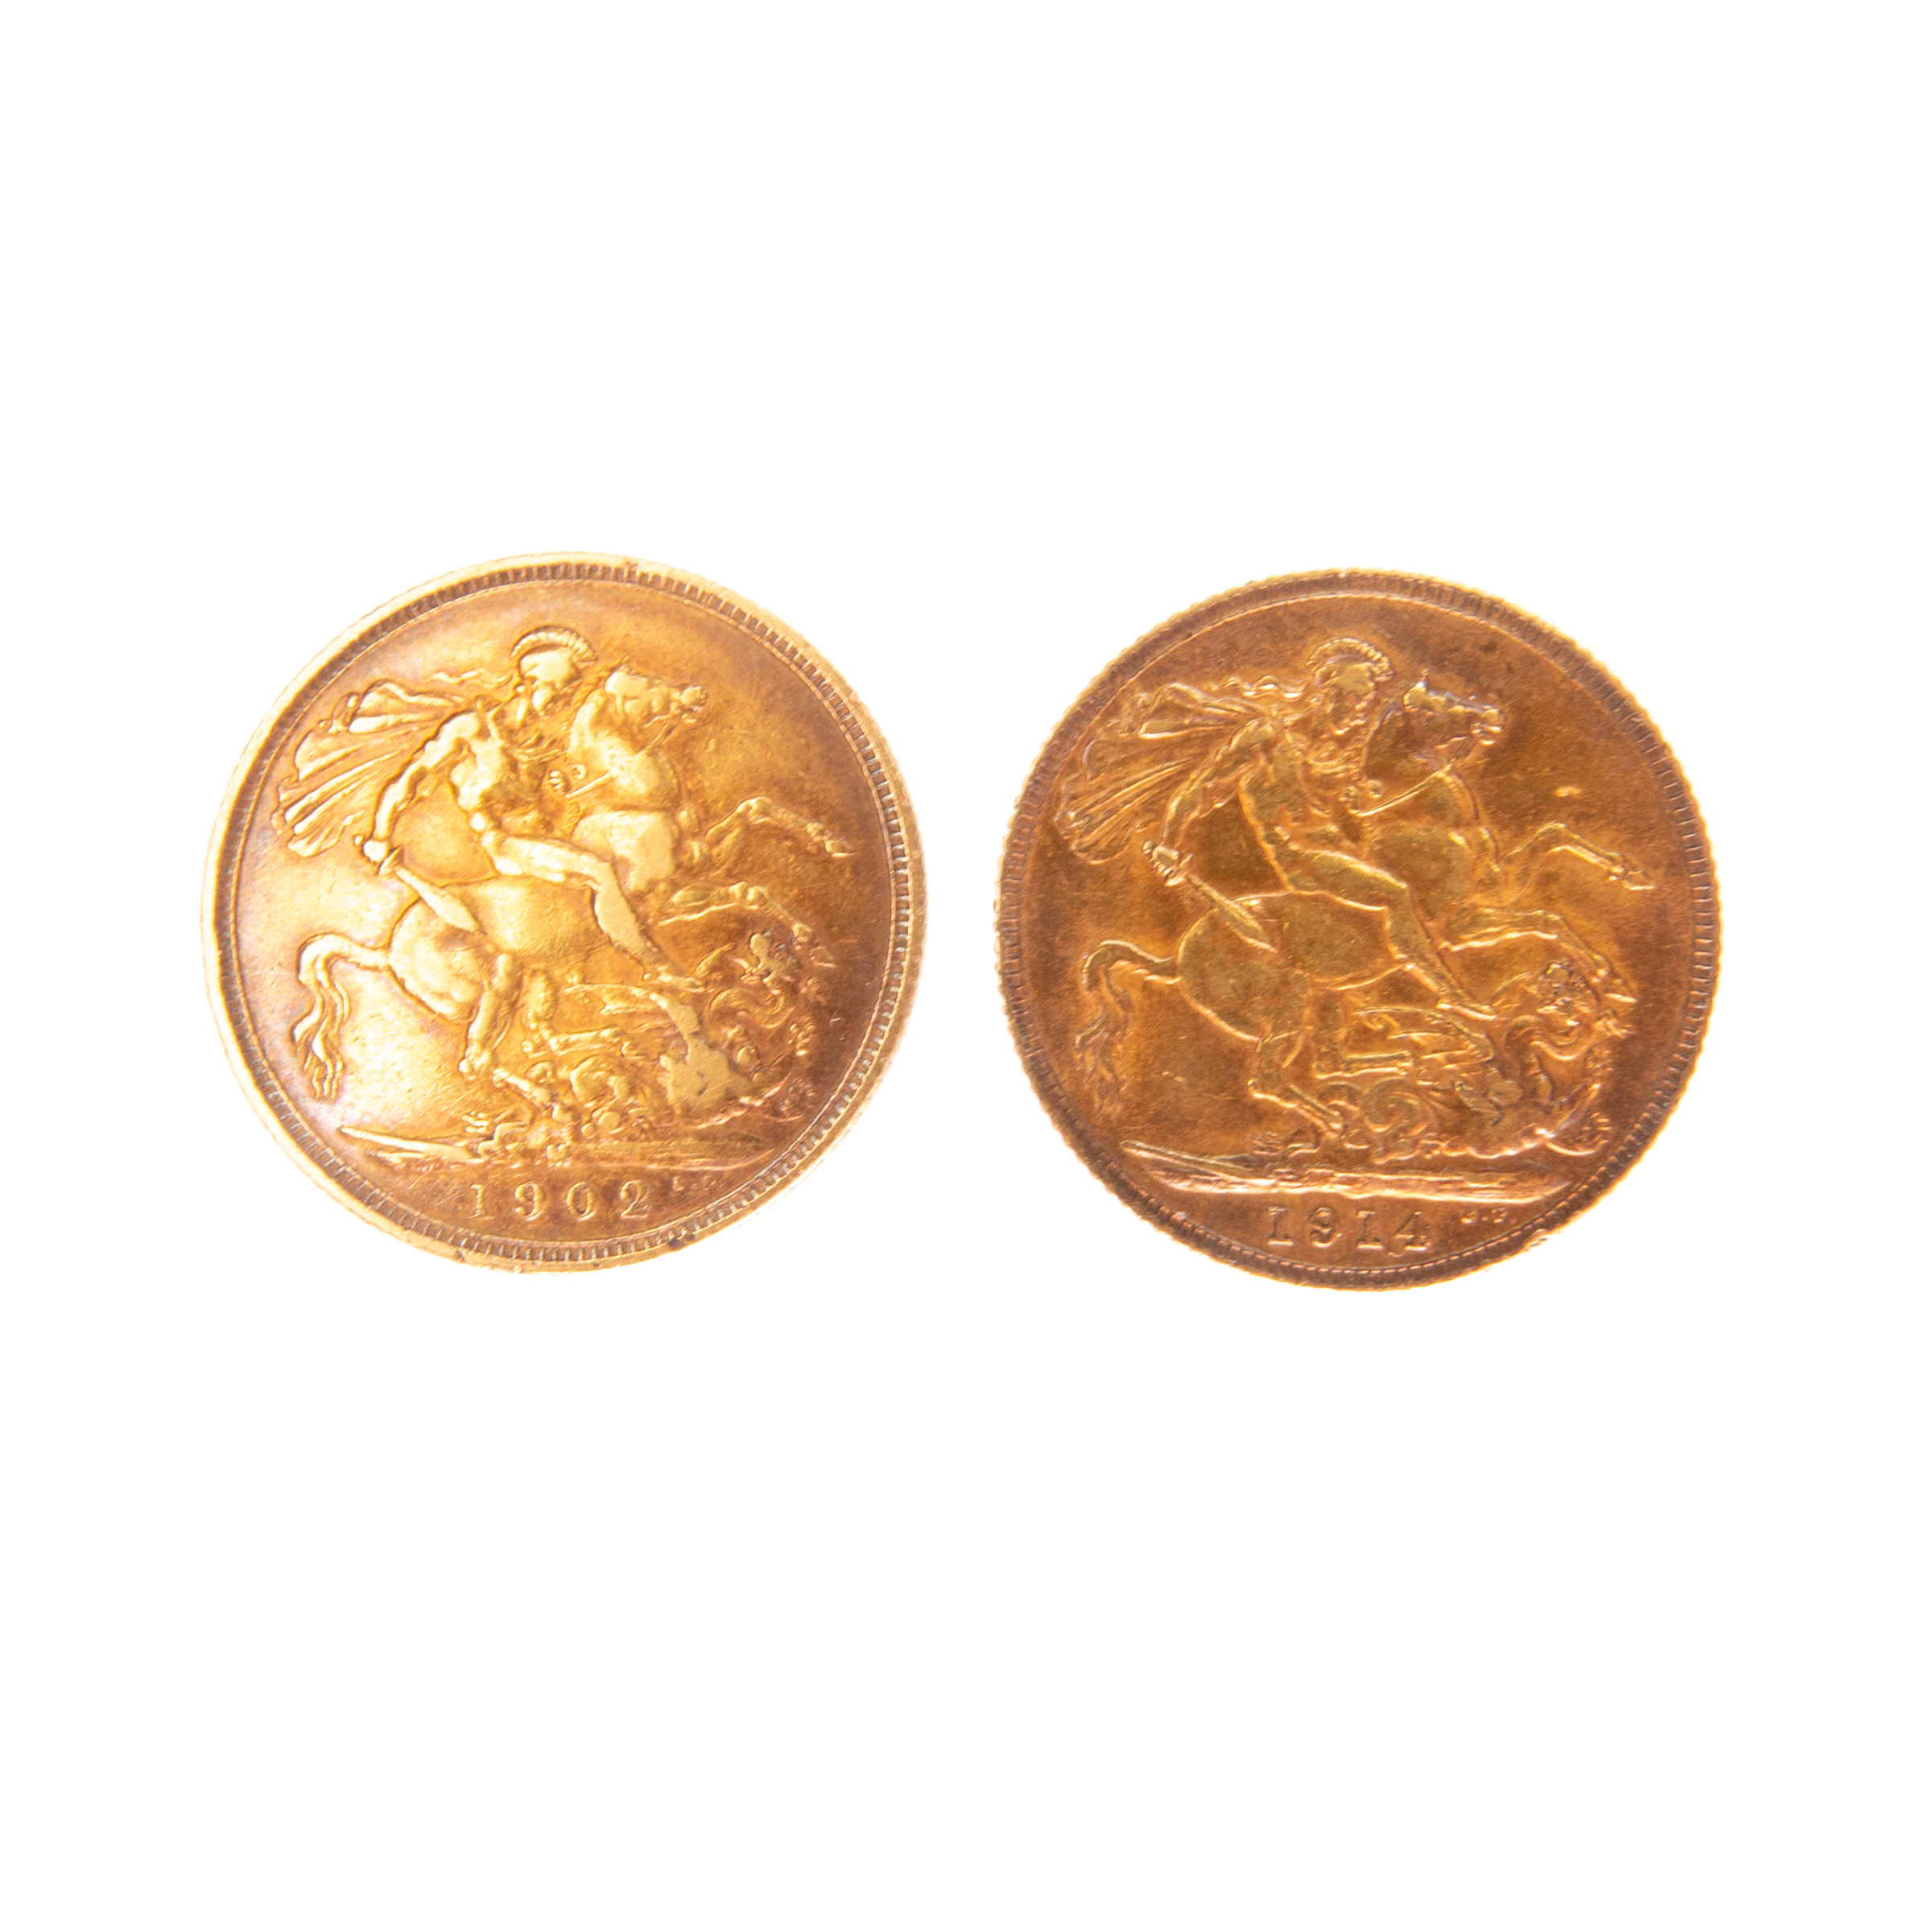 Two British Gold Sovereigns